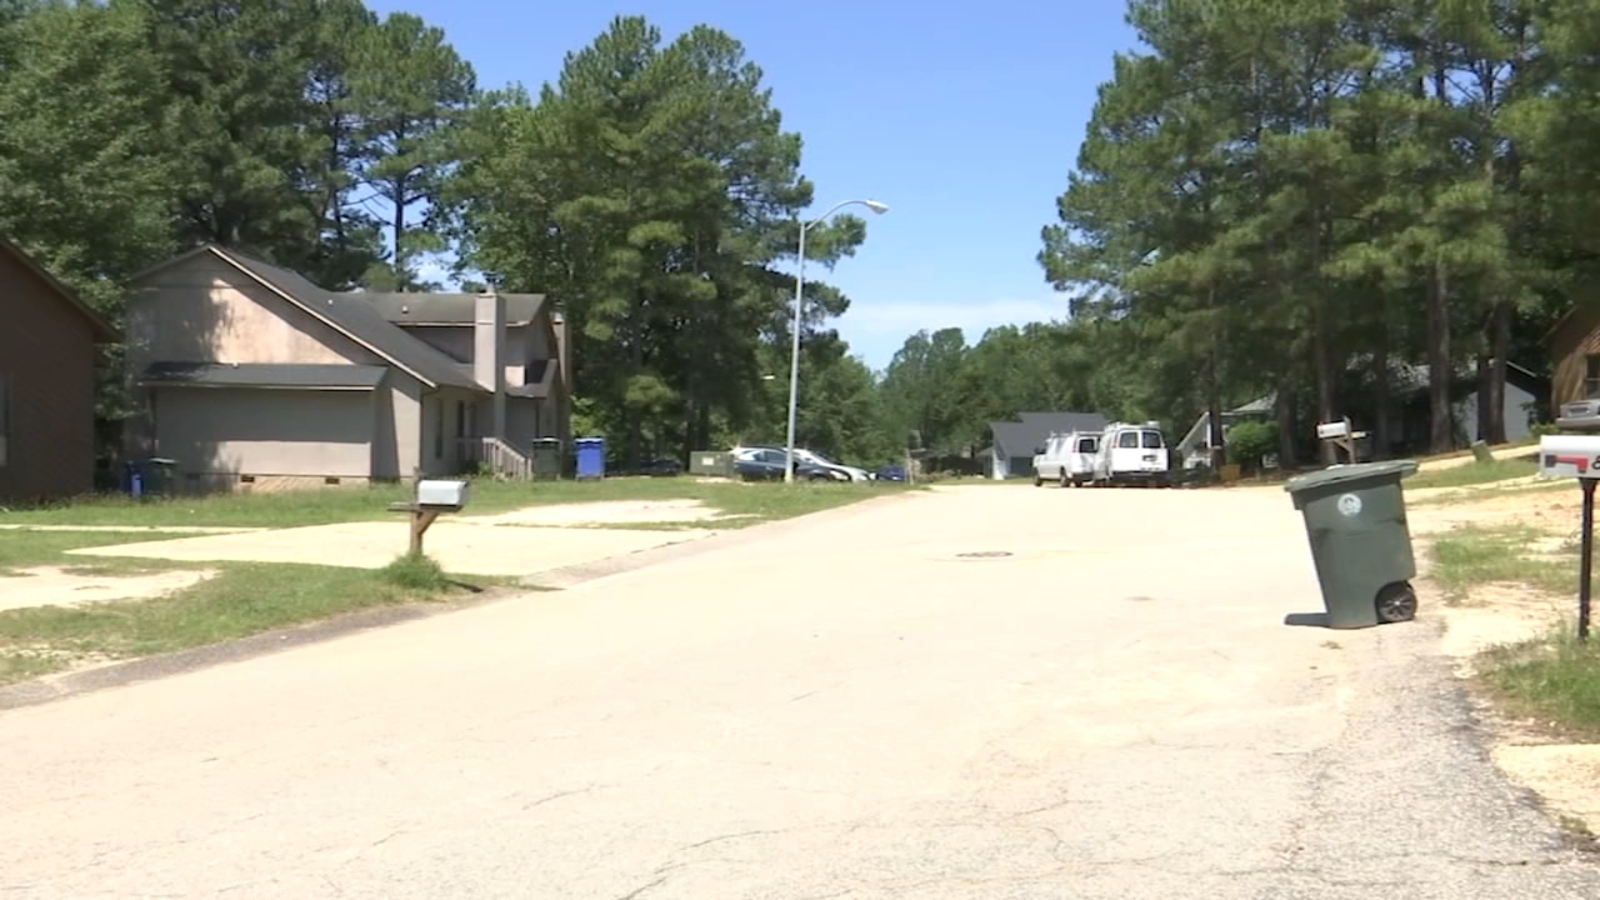 Fayetteville shooting | Juvenile injured in drive-by shooting in Cumberland County, police say [Video]